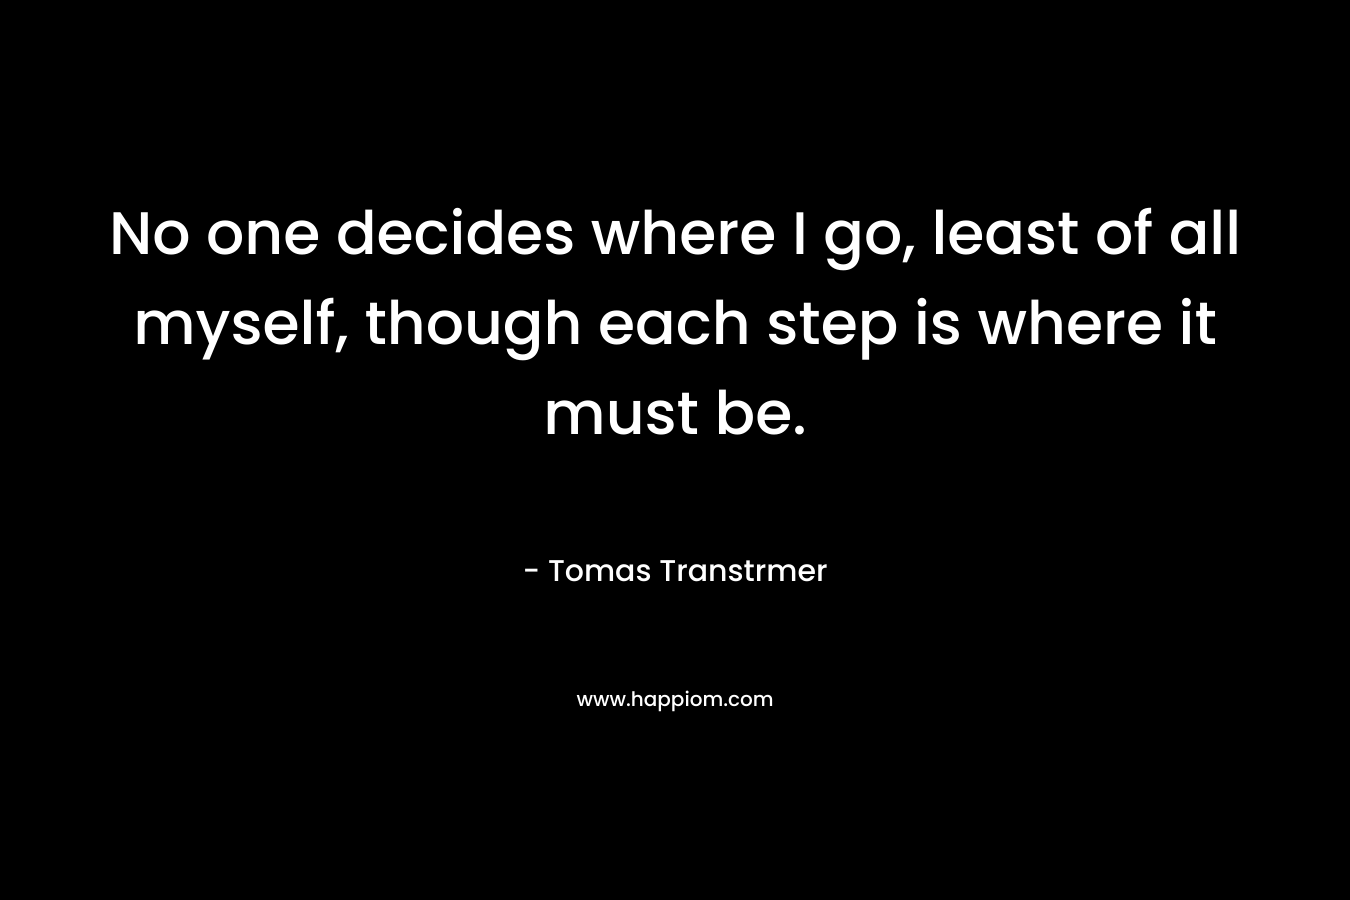 No one decides where I go, least of all myself, though each step is where it must be. – Tomas Transtrmer